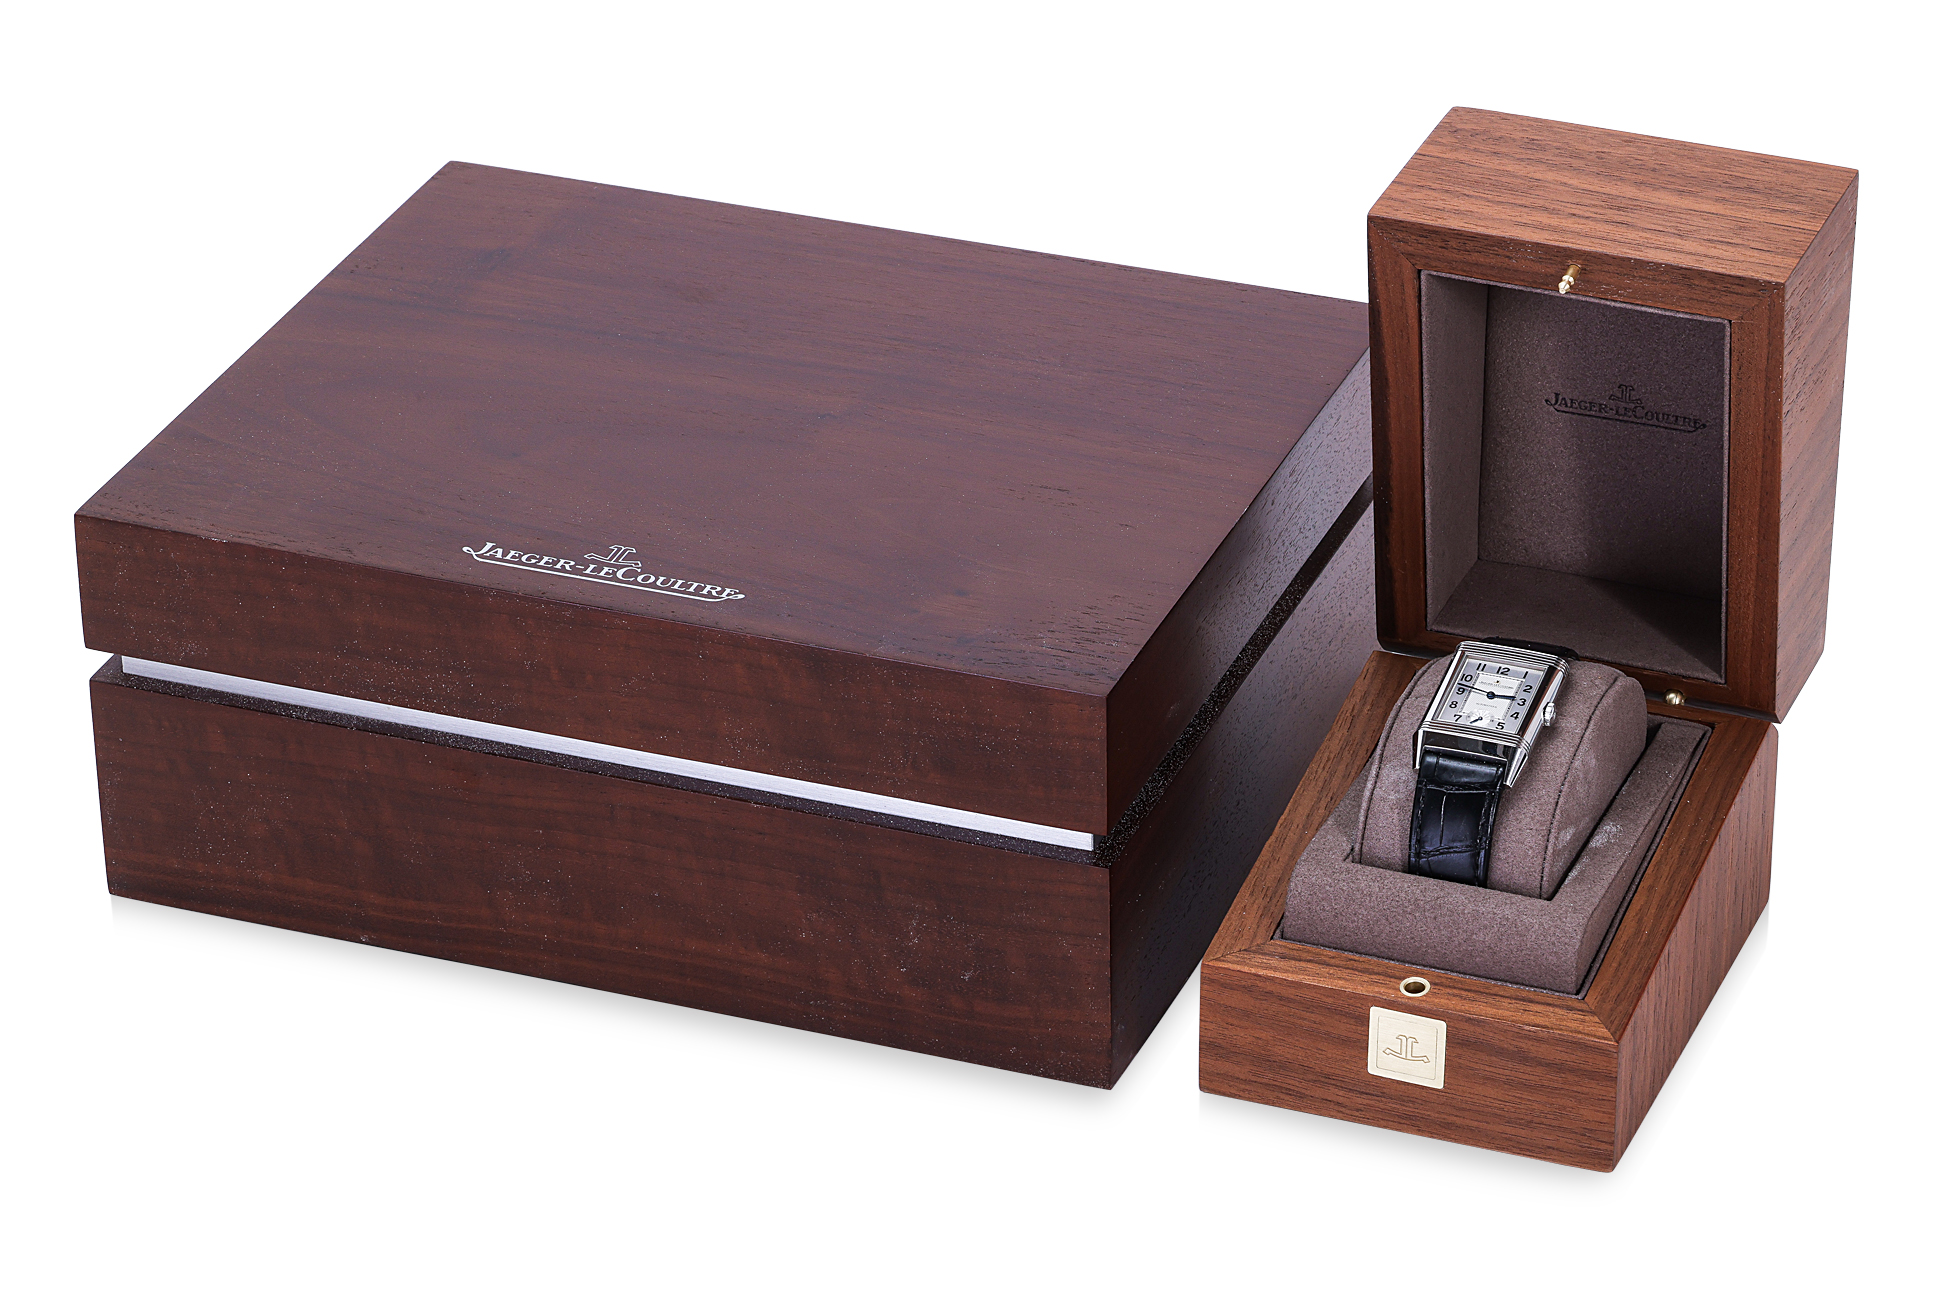 A JAEGER LECOULTRE LIMITED EDITION SG 50 REVERSO WATCH - Image 6 of 8